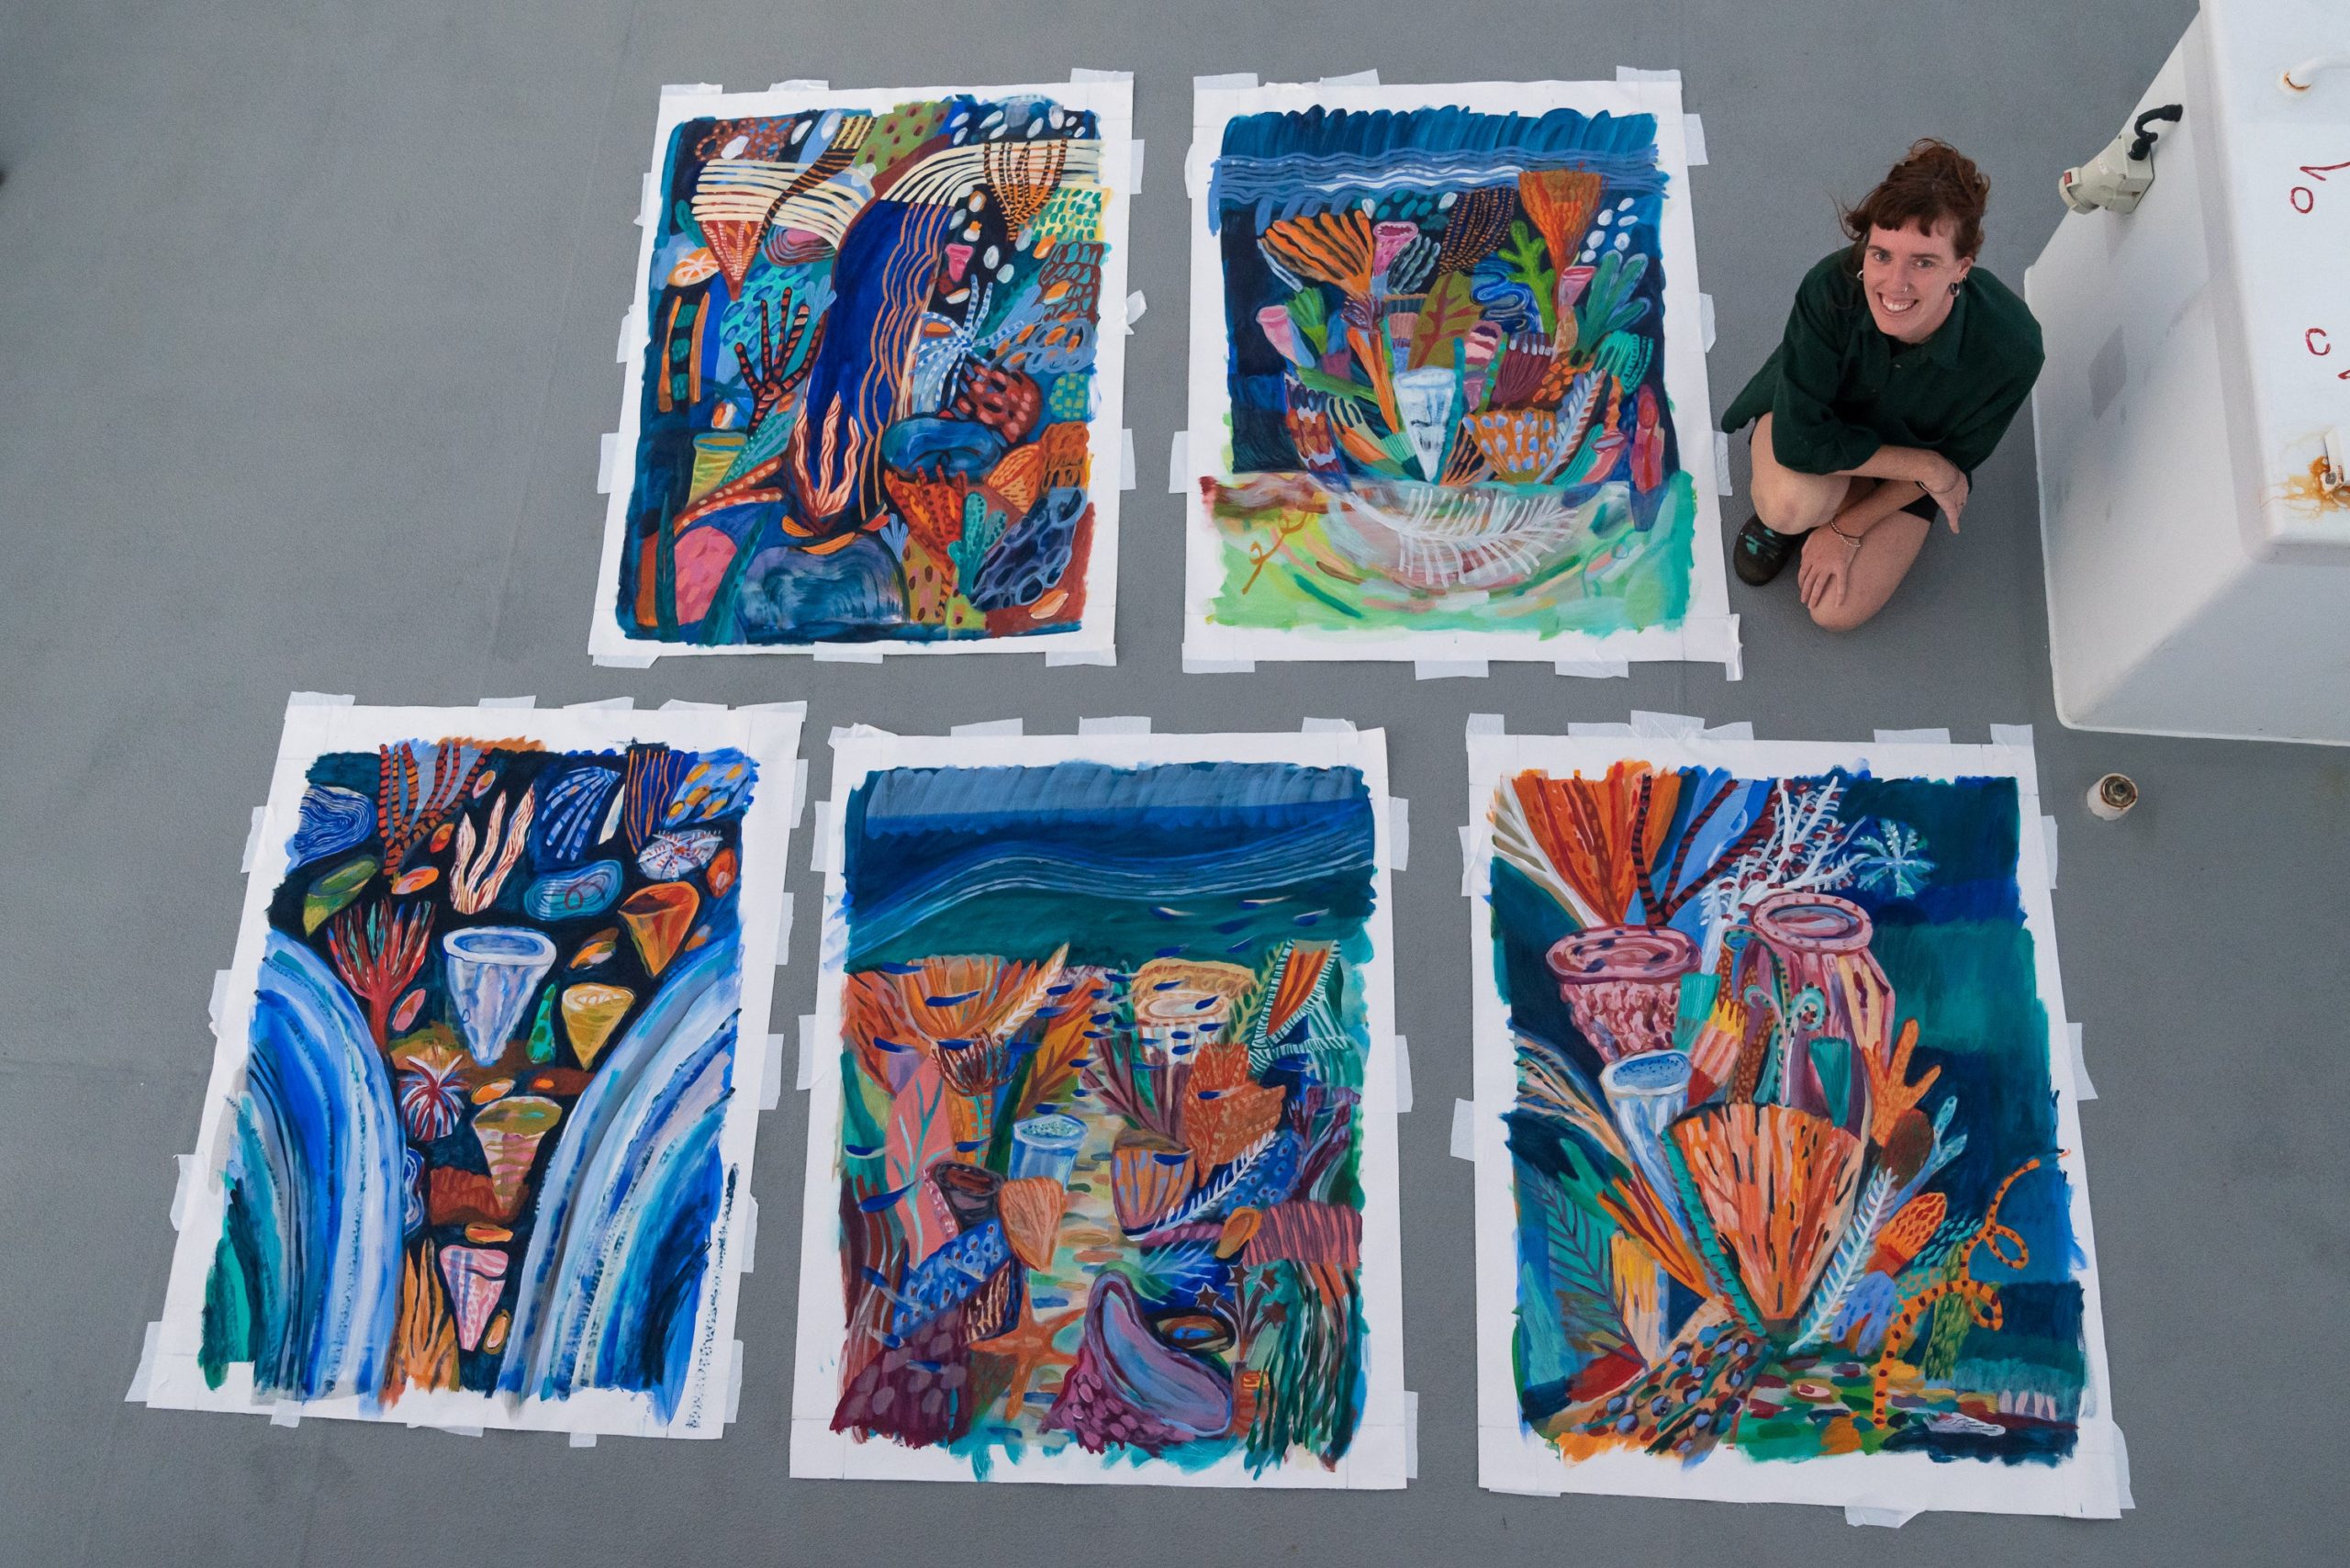 Ellie Hannon on the research vessel with the paintings she made onboard (Photo: Schmidt Ocean Institute)